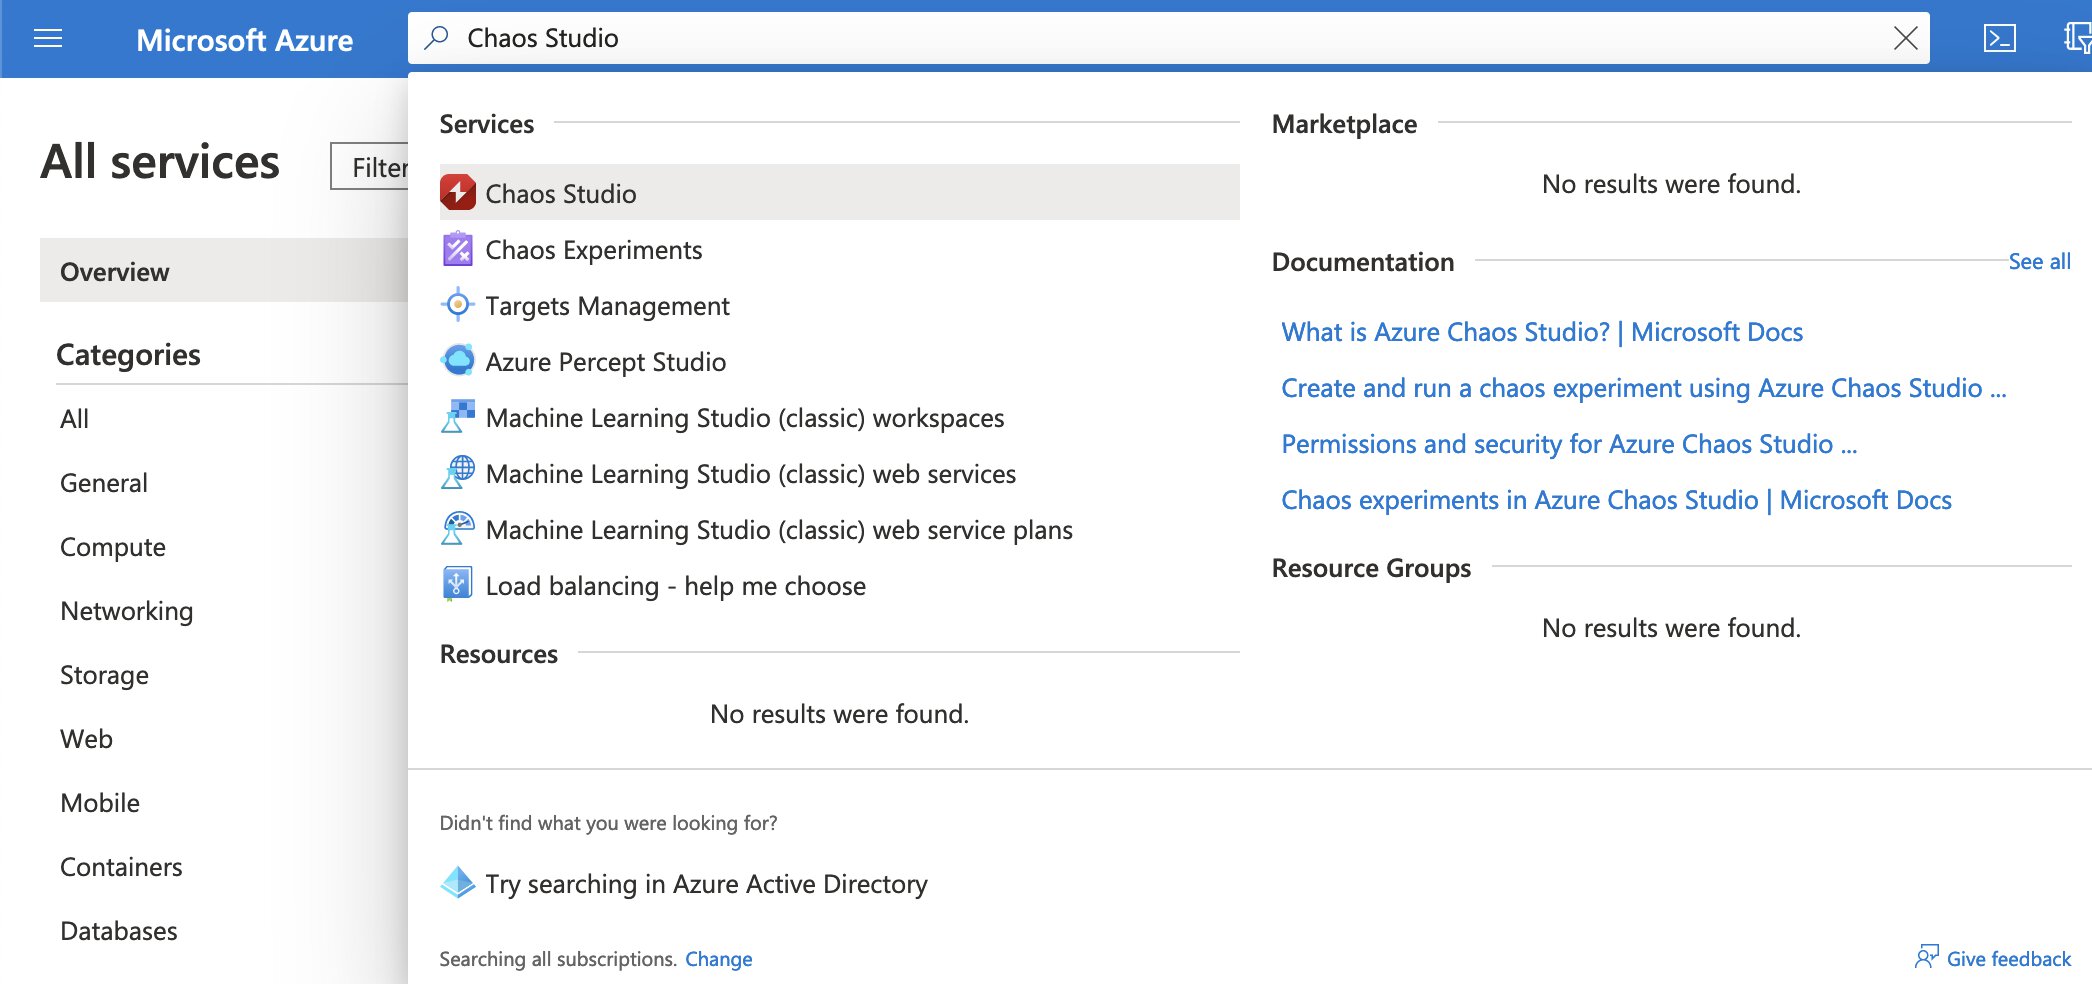 Image of the Azure Portal, we are entering the search terms &ldquo;Chaos Studio&rdquo; in the search bar on top of the portal interface.